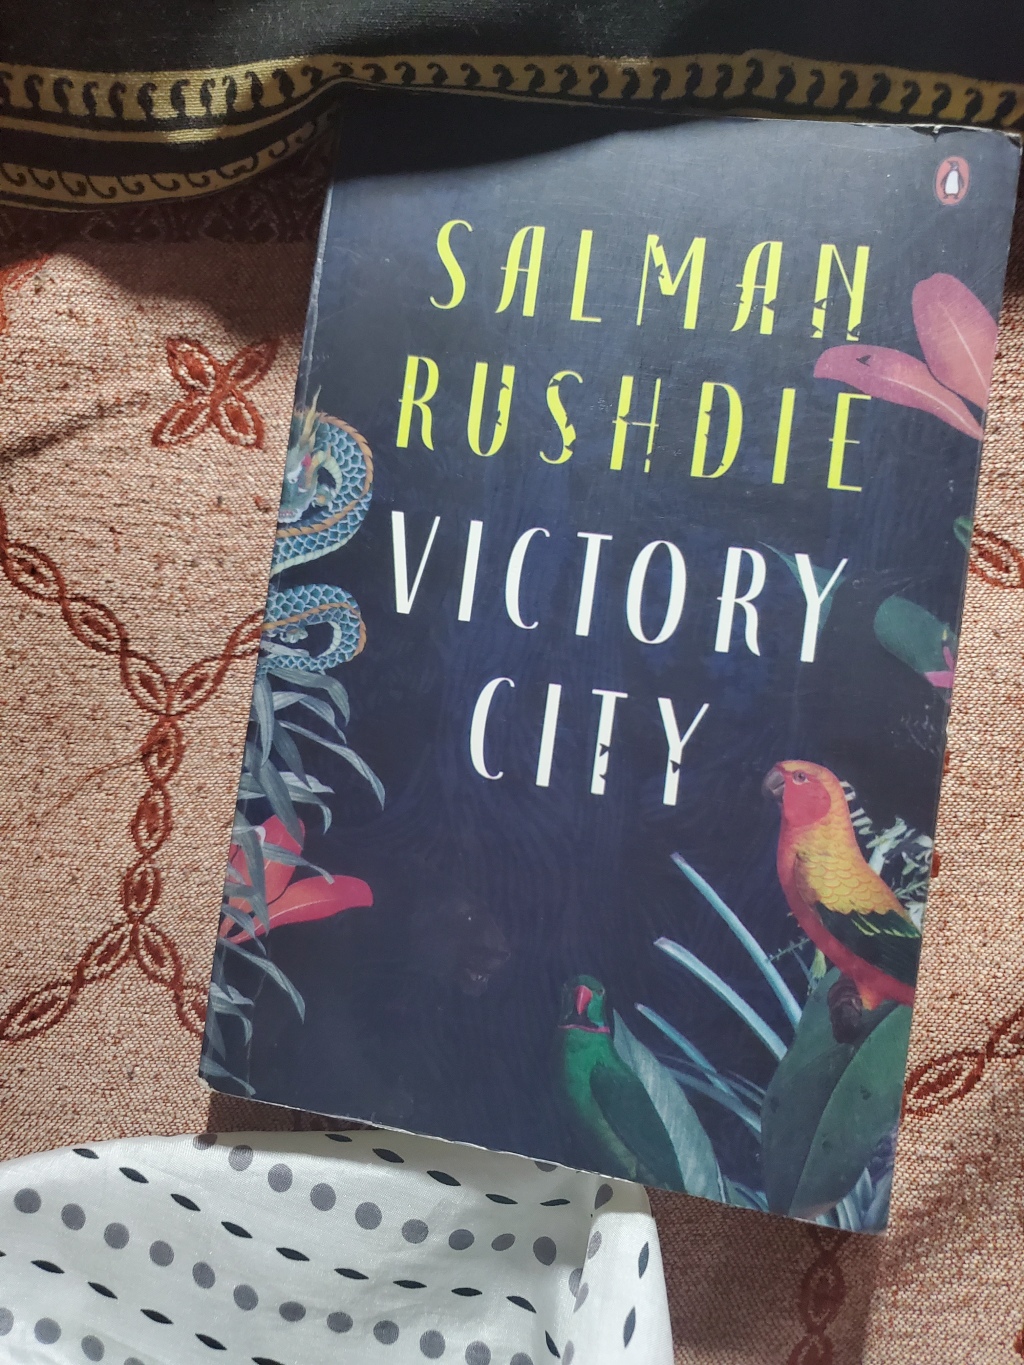 Book Review: Victory City By Salman Rushdie